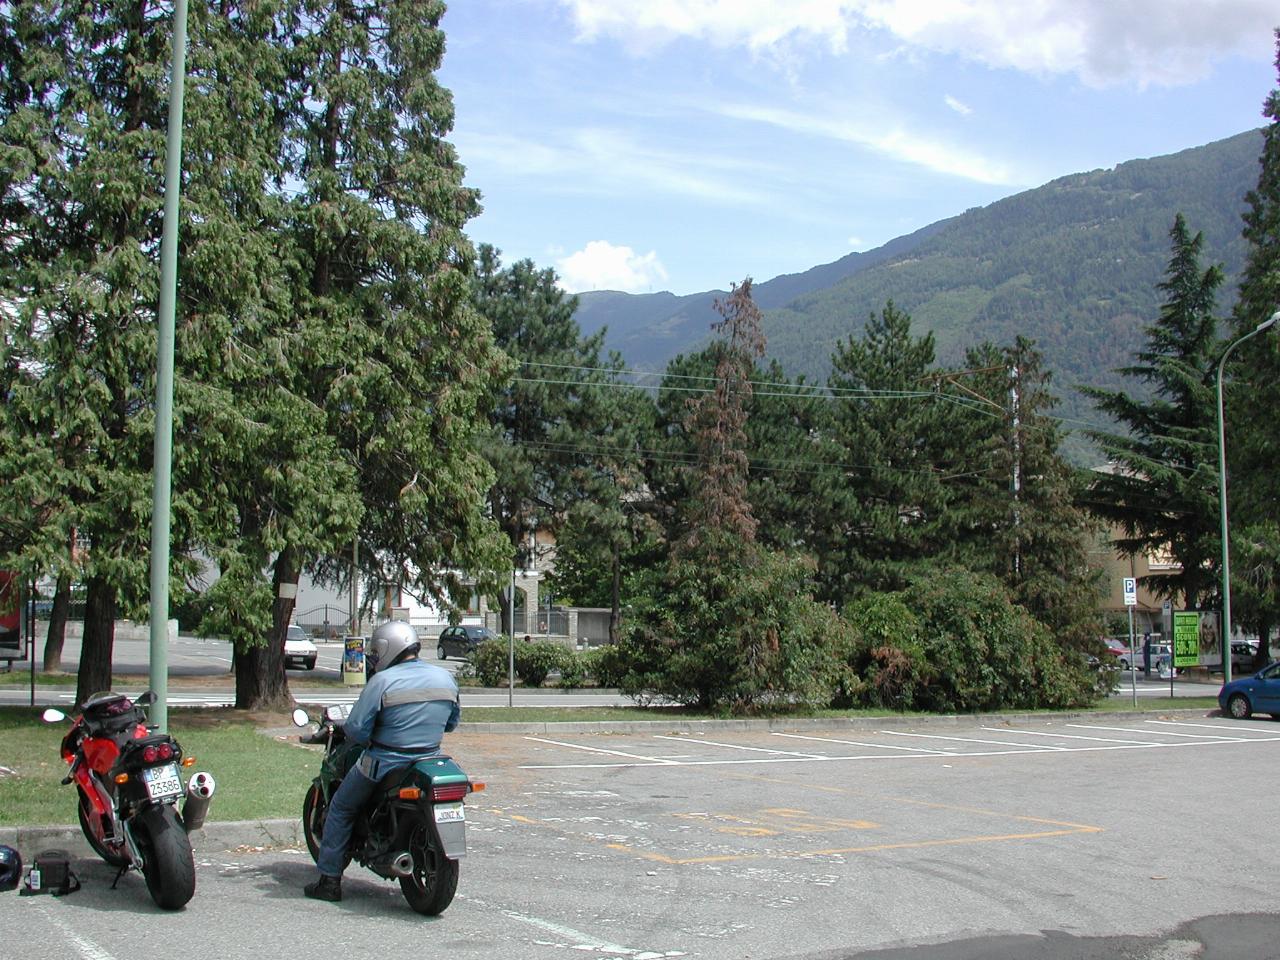 Our bikes in Tirano at the restaurant